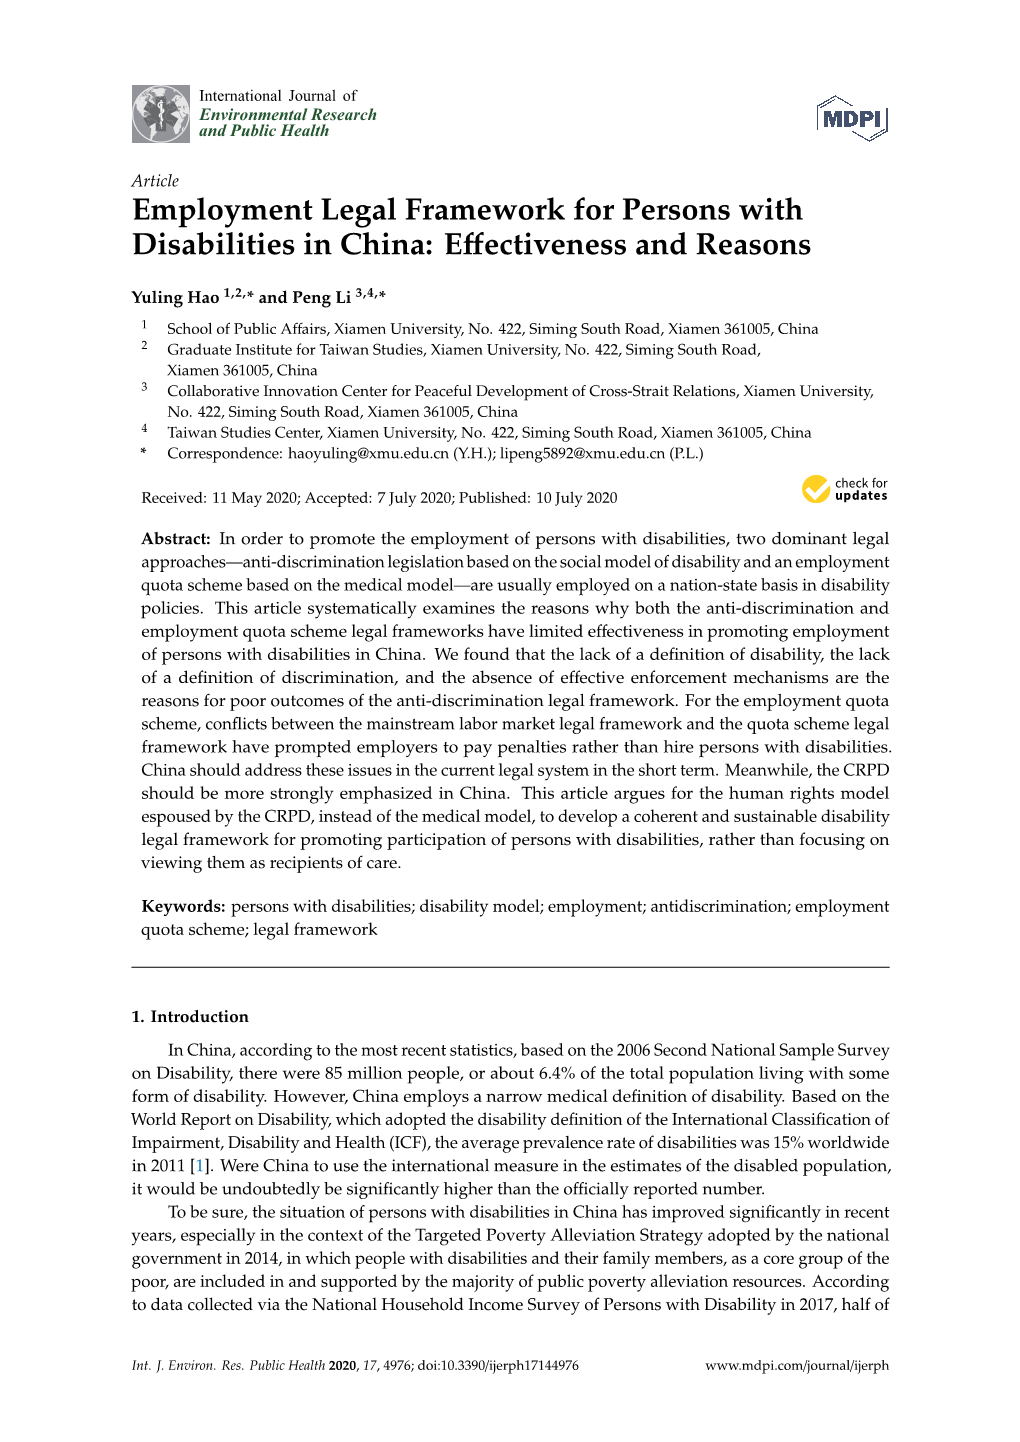 Employment Legal Framework for Persons with Disabilities in China: Eﬀectiveness and Reasons